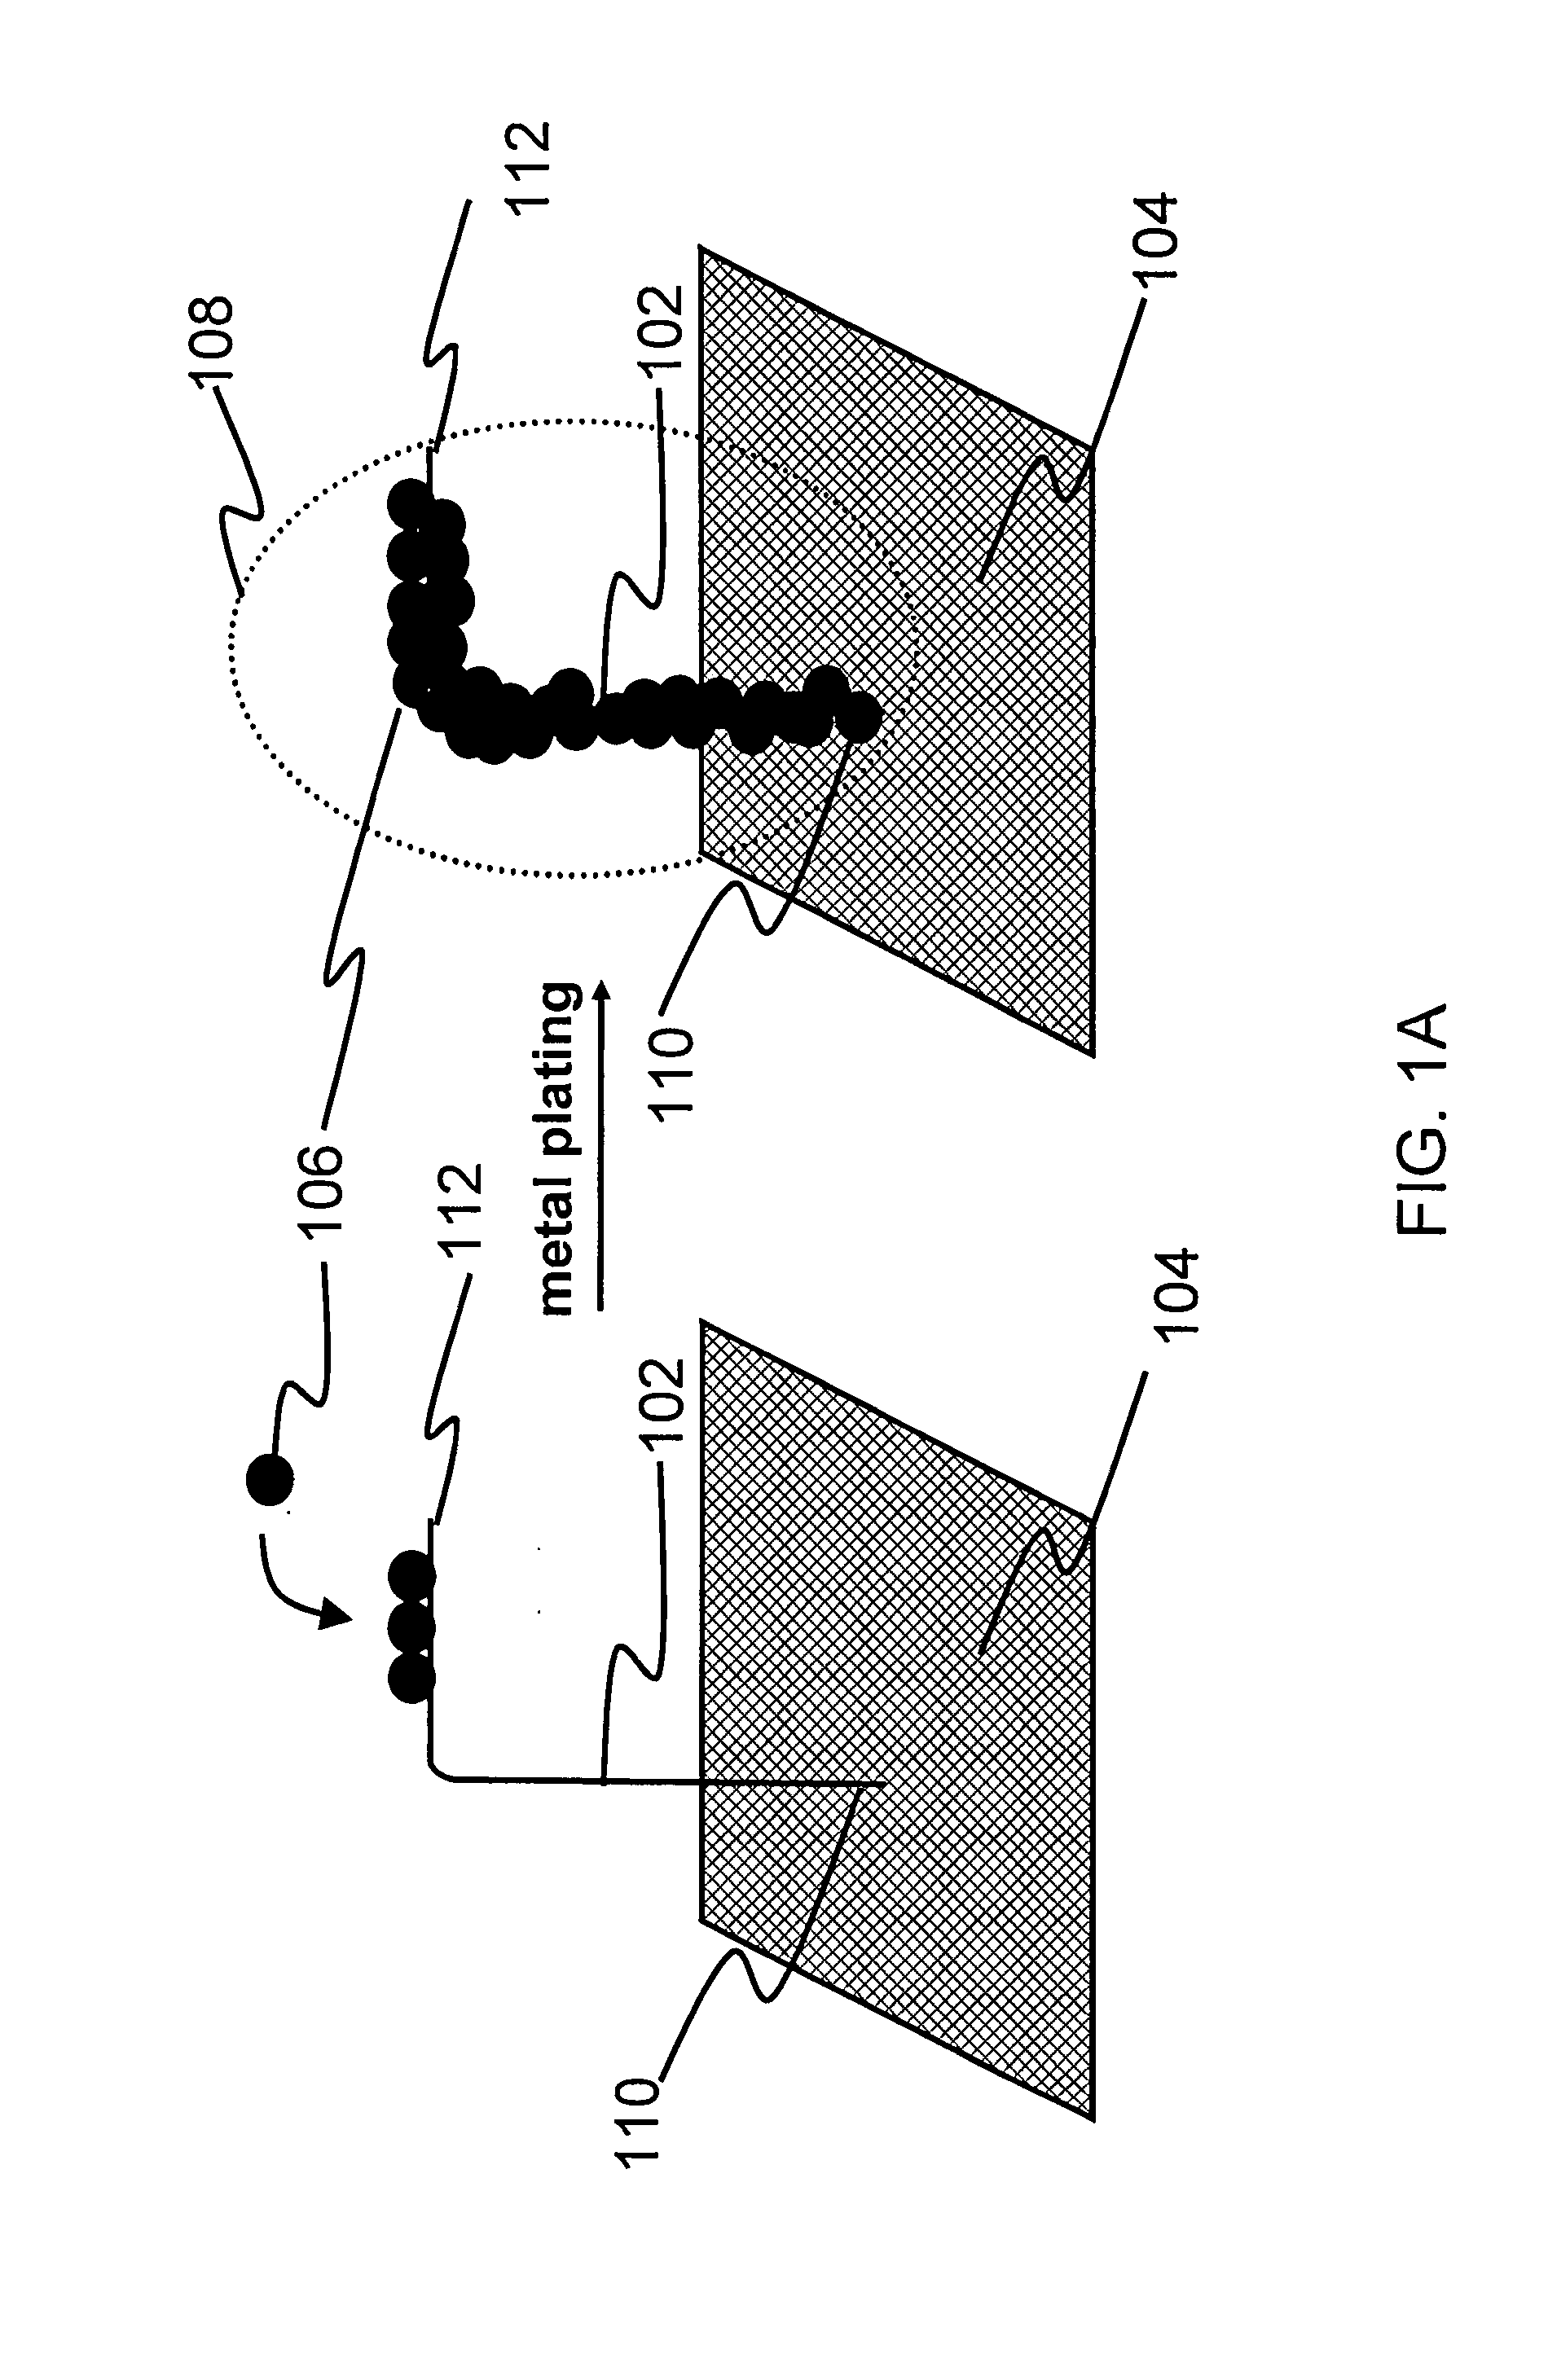 Method for self-assembly of arbitrary metal patterns on DNA scaffolds